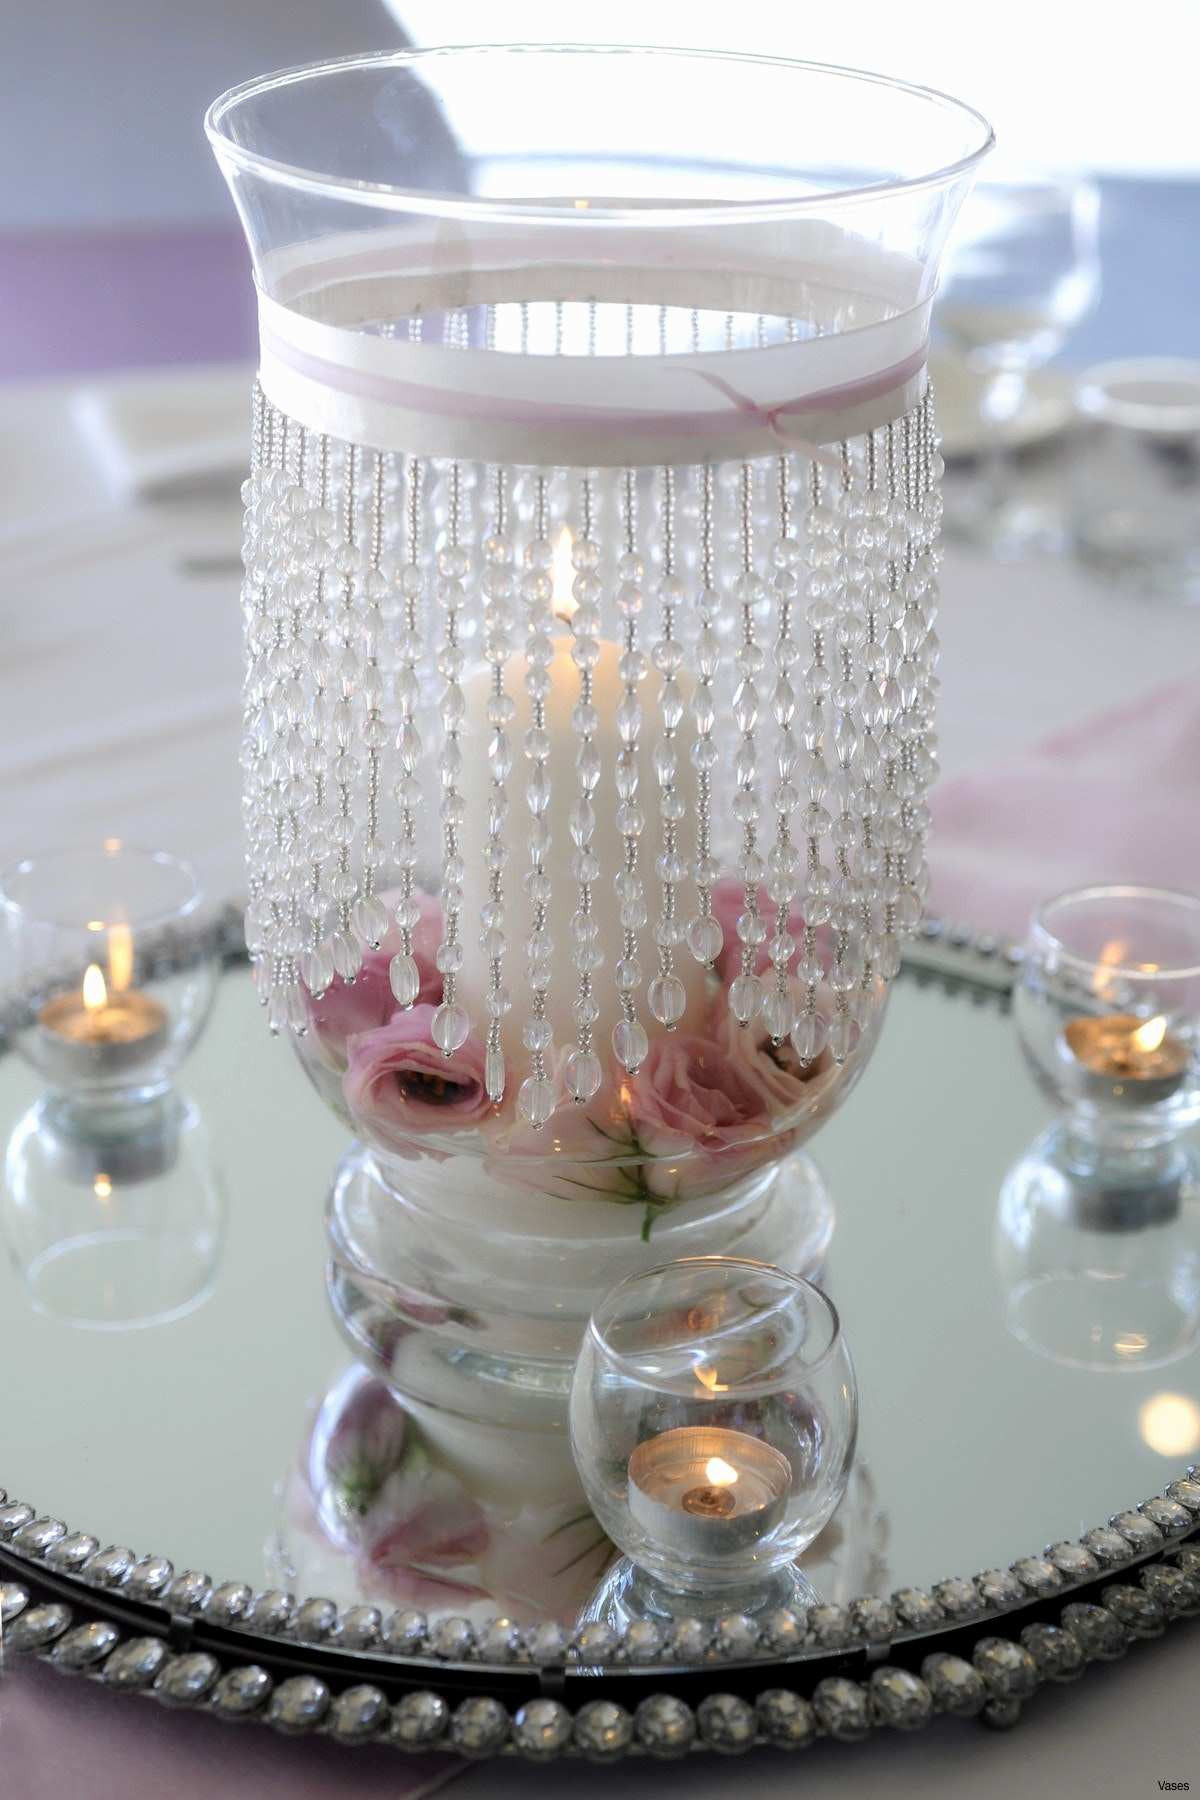 26 Famous Floating Candle Vases Bulk 2024 free download floating candle vases bulk of 26 luxury wedding centerpieces ideas sokitchenlv pertaining to centerpieces weddings awesome wedding centerpieces vases glassh for centerpieces